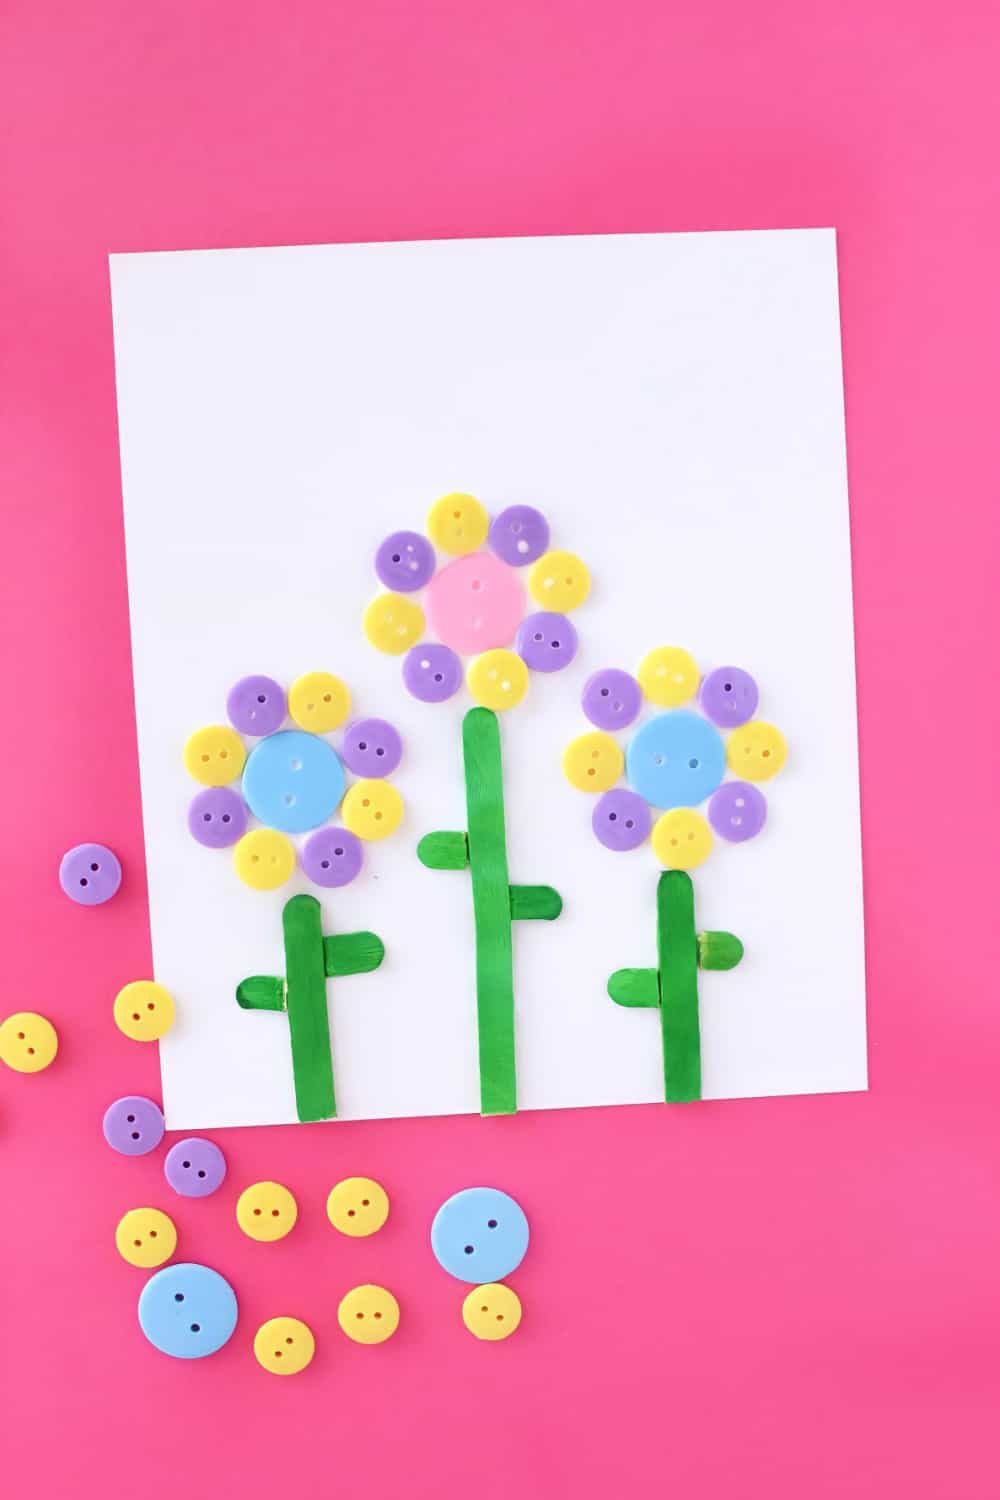 Button Flower Craft - Toddler at Play